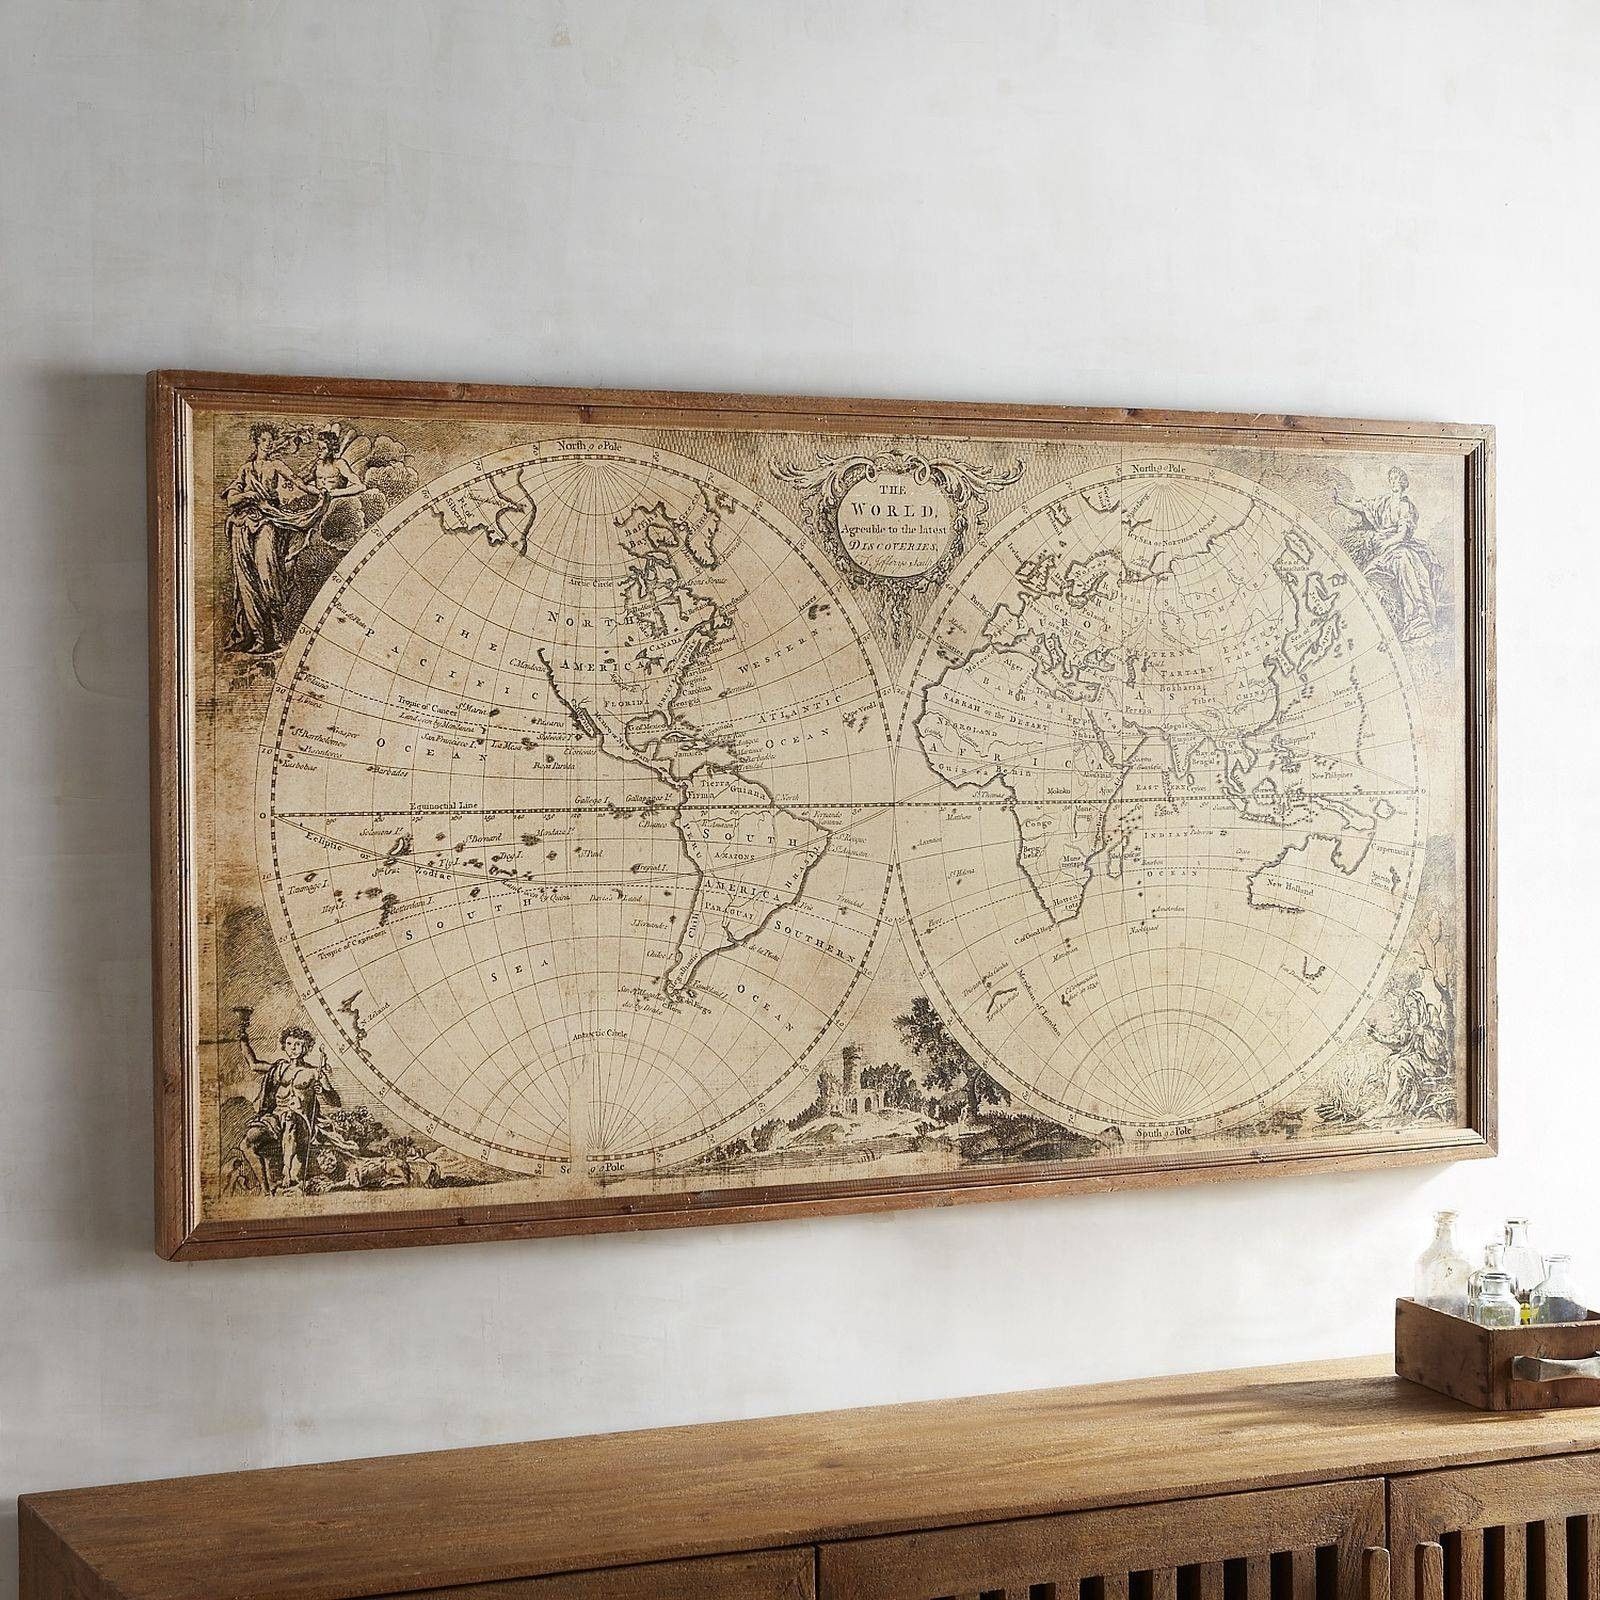 Latest Framed World Map Wall Art Throughout Large On Baadbe Maps Of In Maps Wall Art (View 5 of 20)